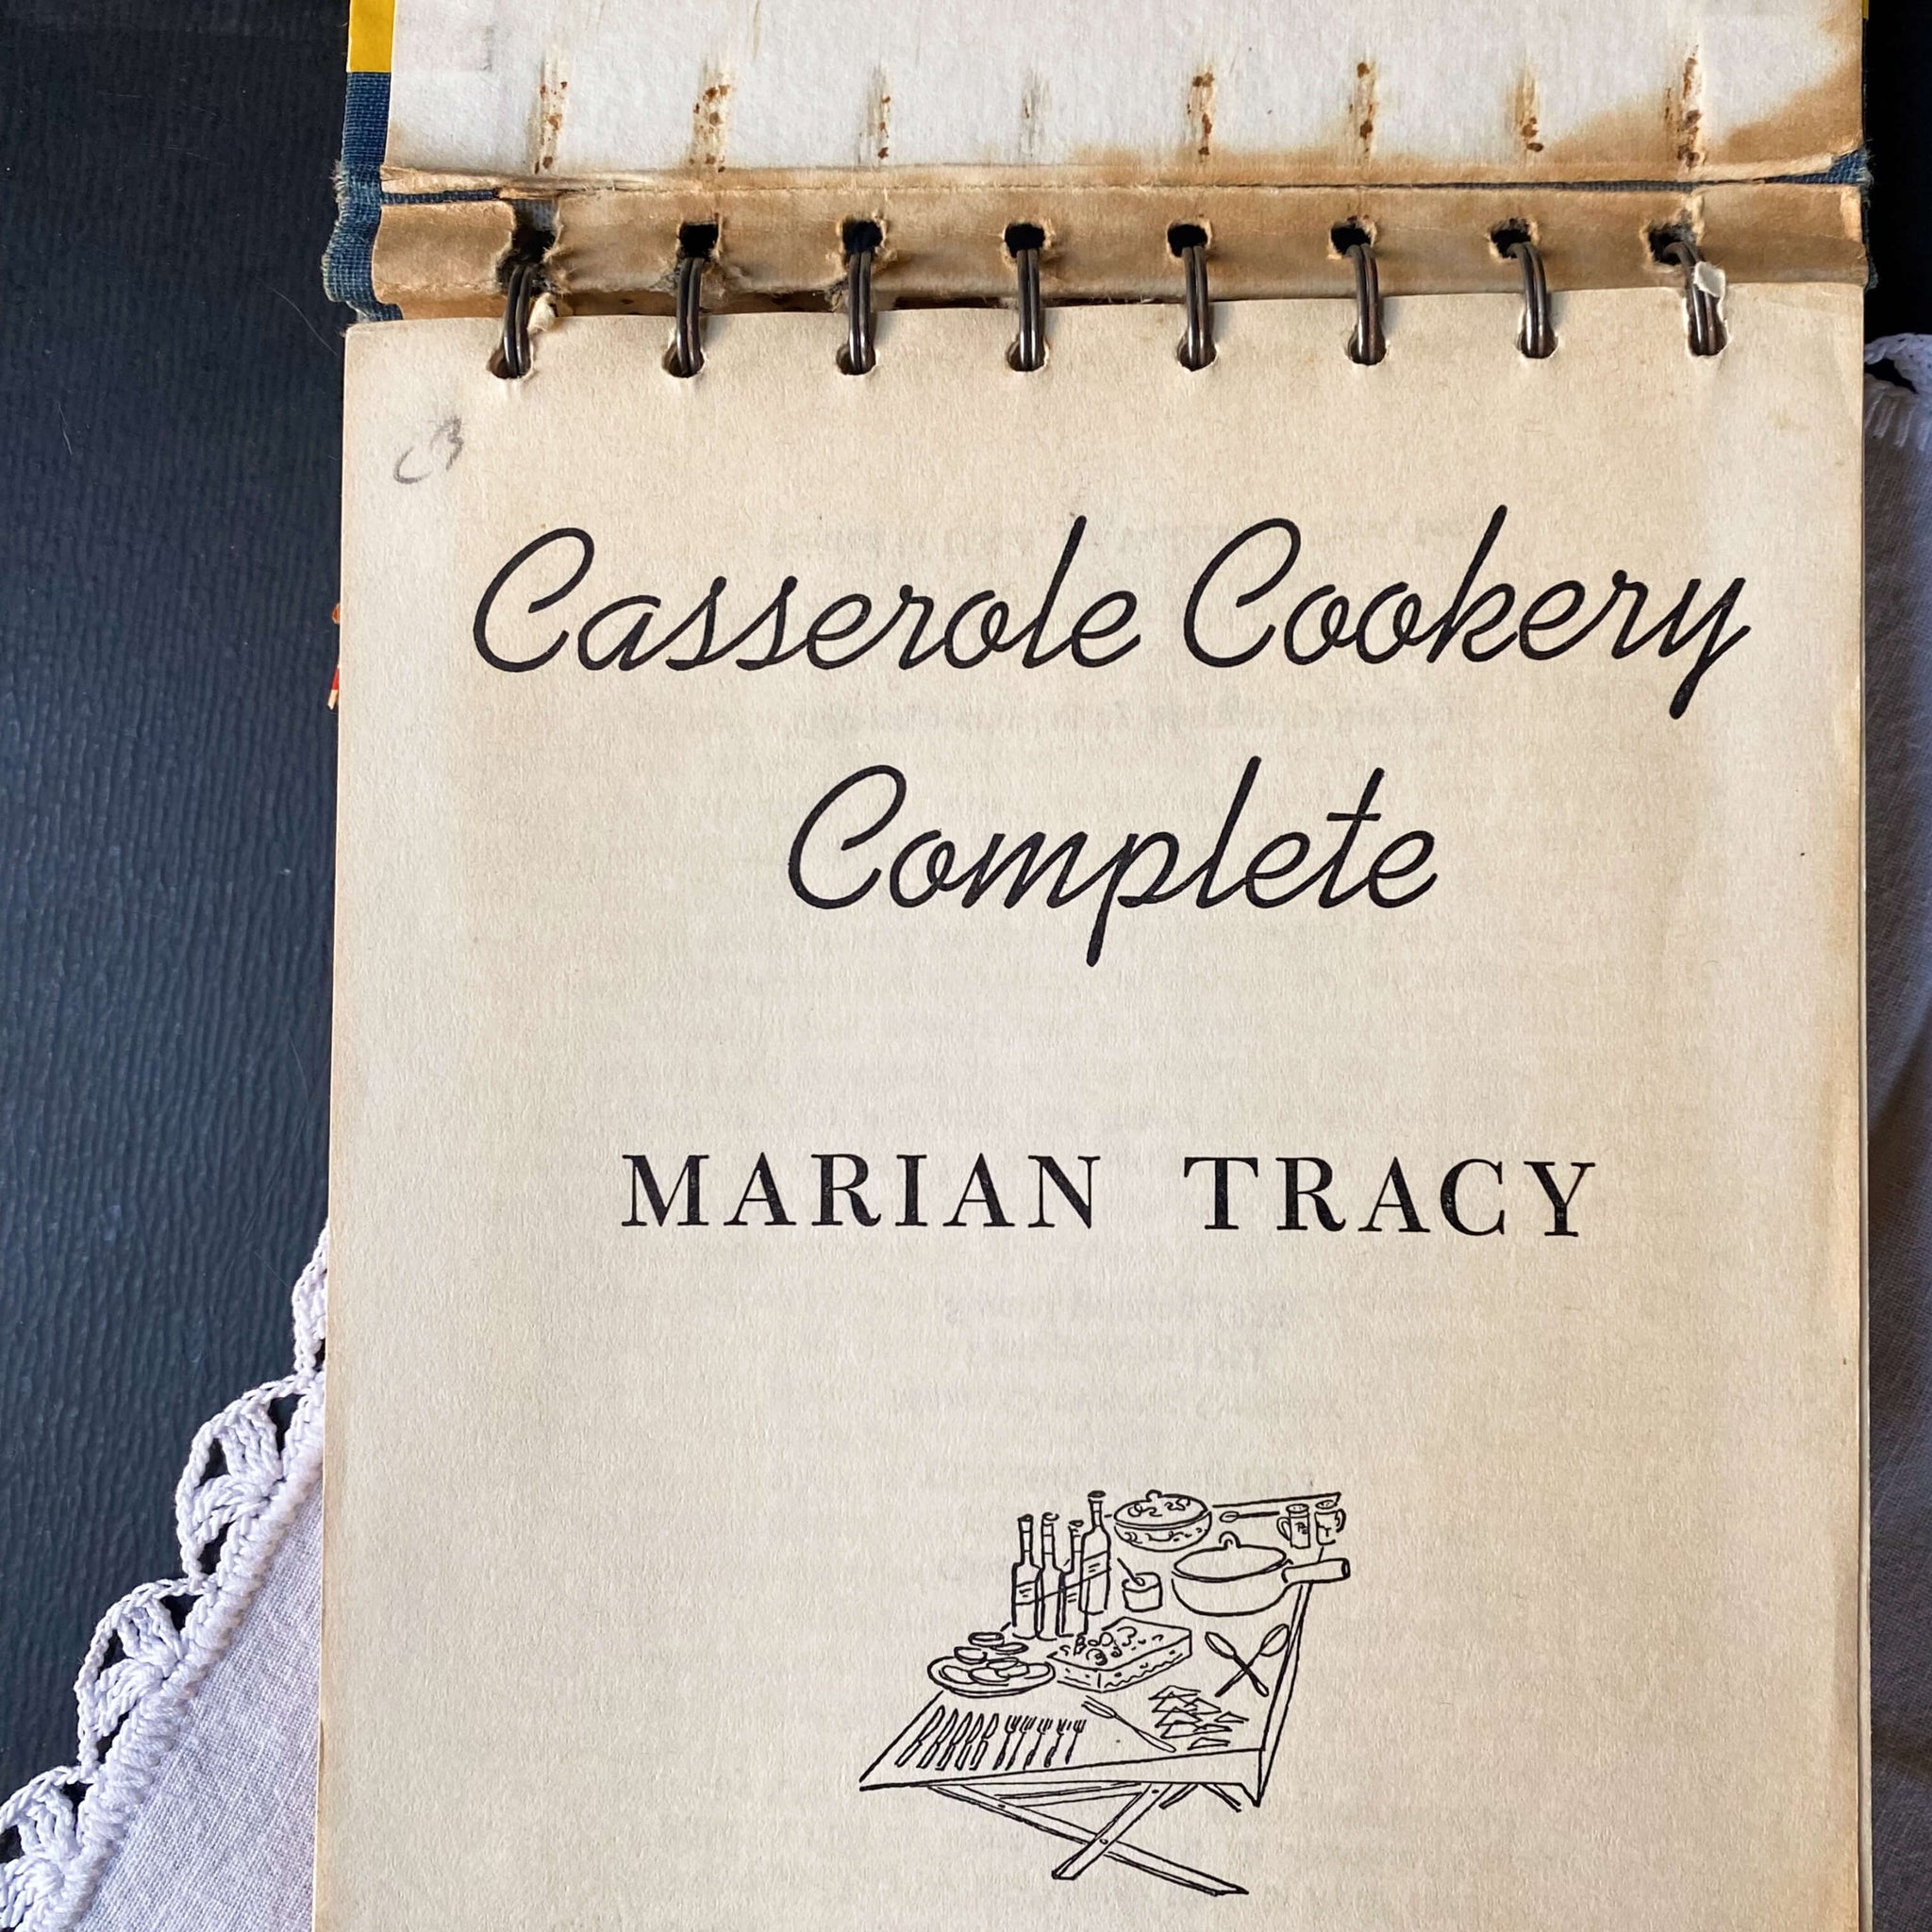 Marian Tracy's Casserole Cookery Complete - 1956 Edition Spiral Bound